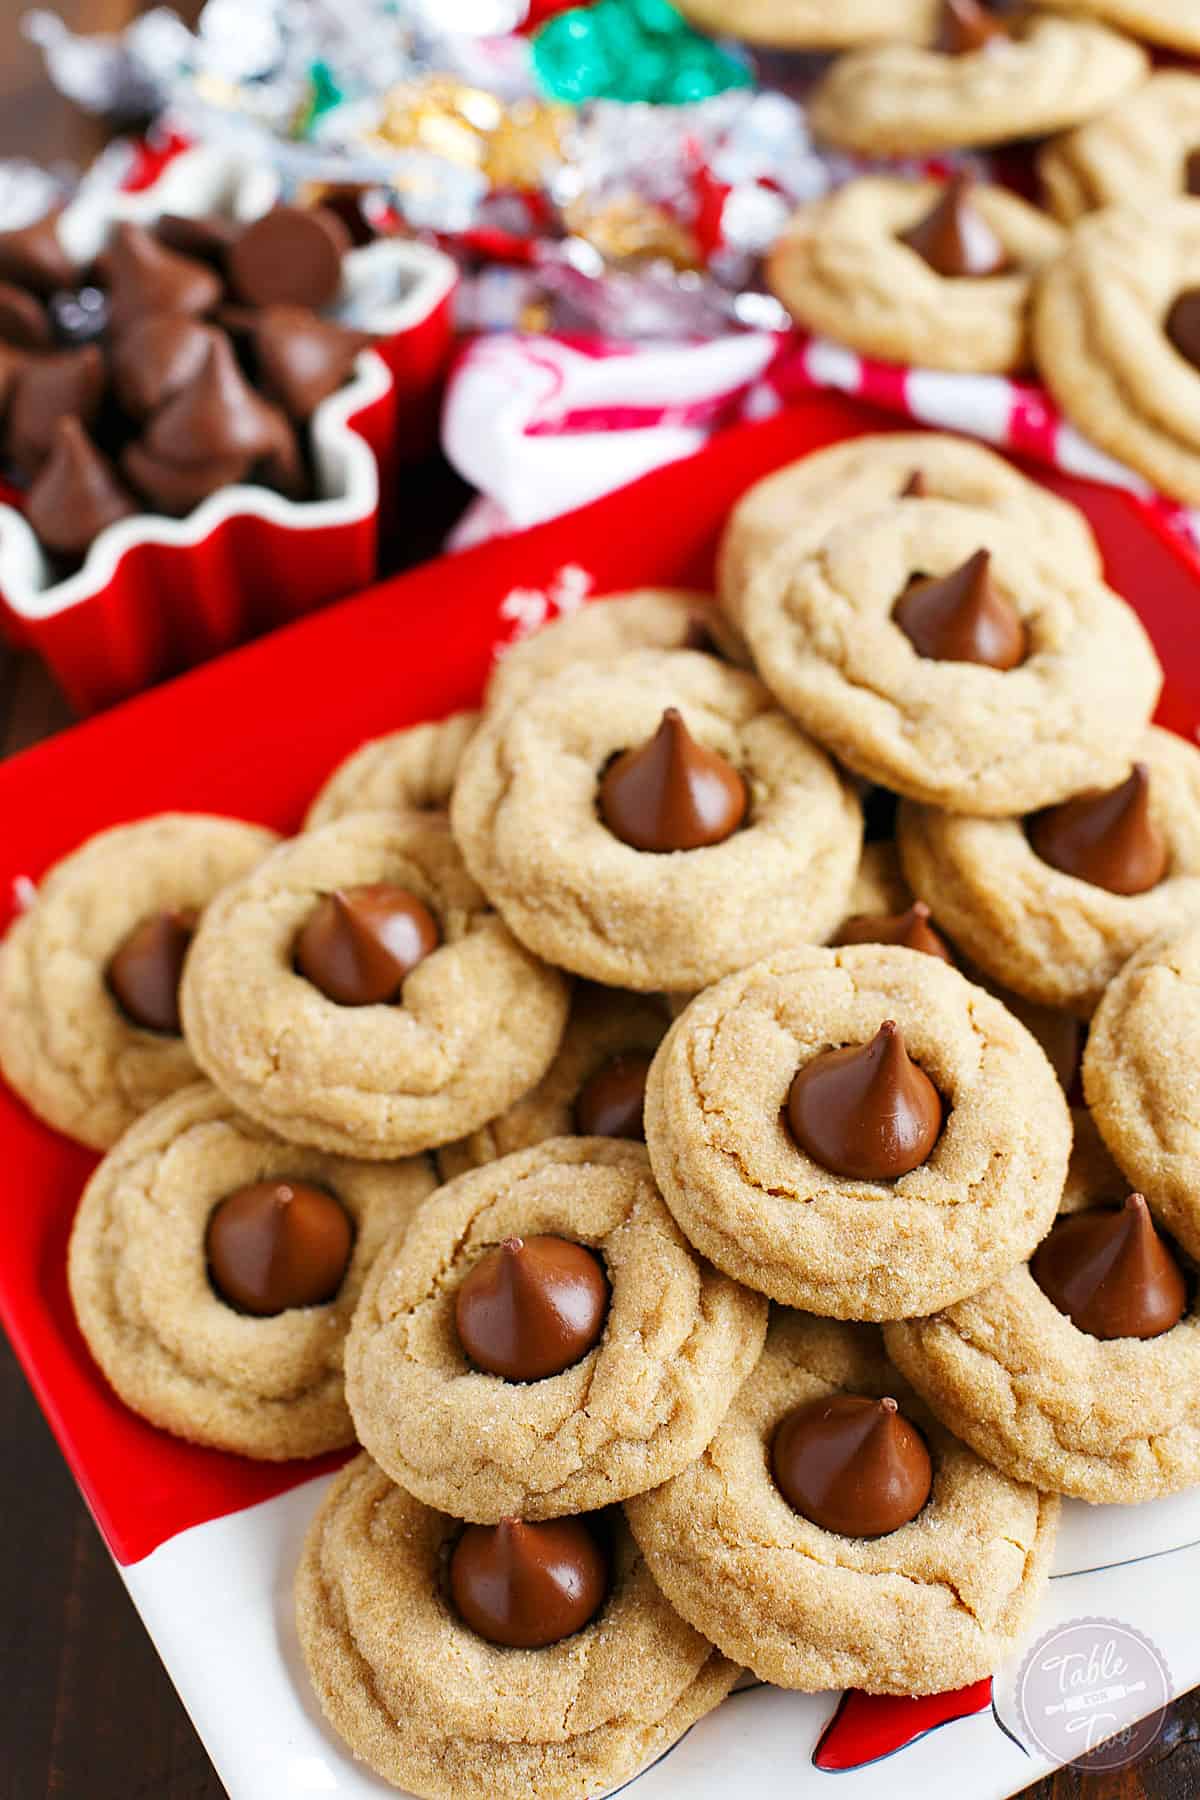 These classic peanut butter blossom cookies are a traditional holiday cookie around Christmas time! Soft and pillowy with a chocolate Hershey kiss in the center! You'll want to make a large batch as they are way too easy to eat and your family won't be able to keep their hands out of the cookie jar!